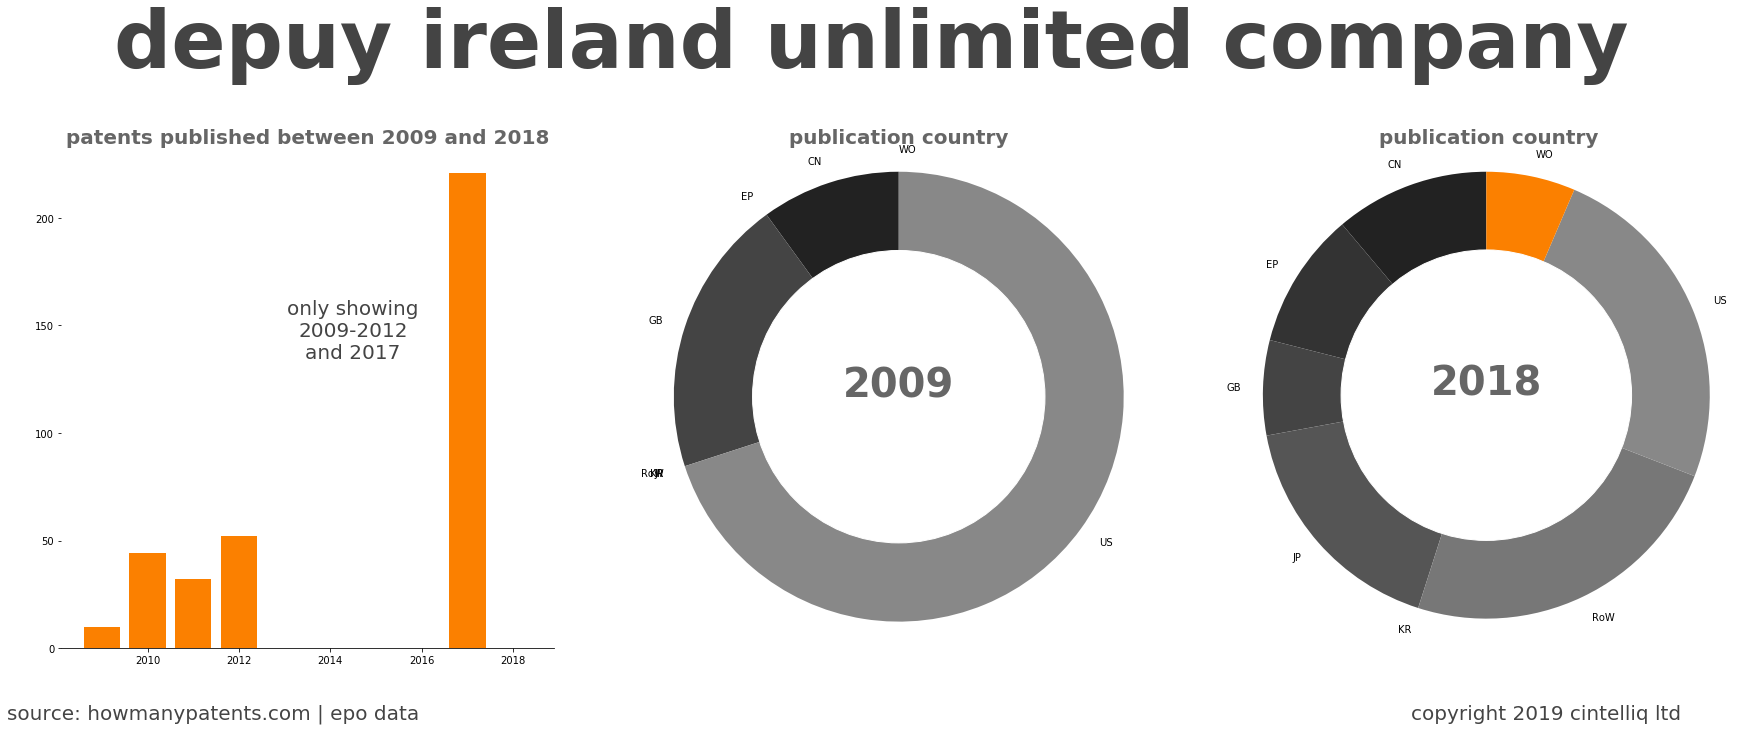 summary of patents for Depuy Ireland Unlimited Company